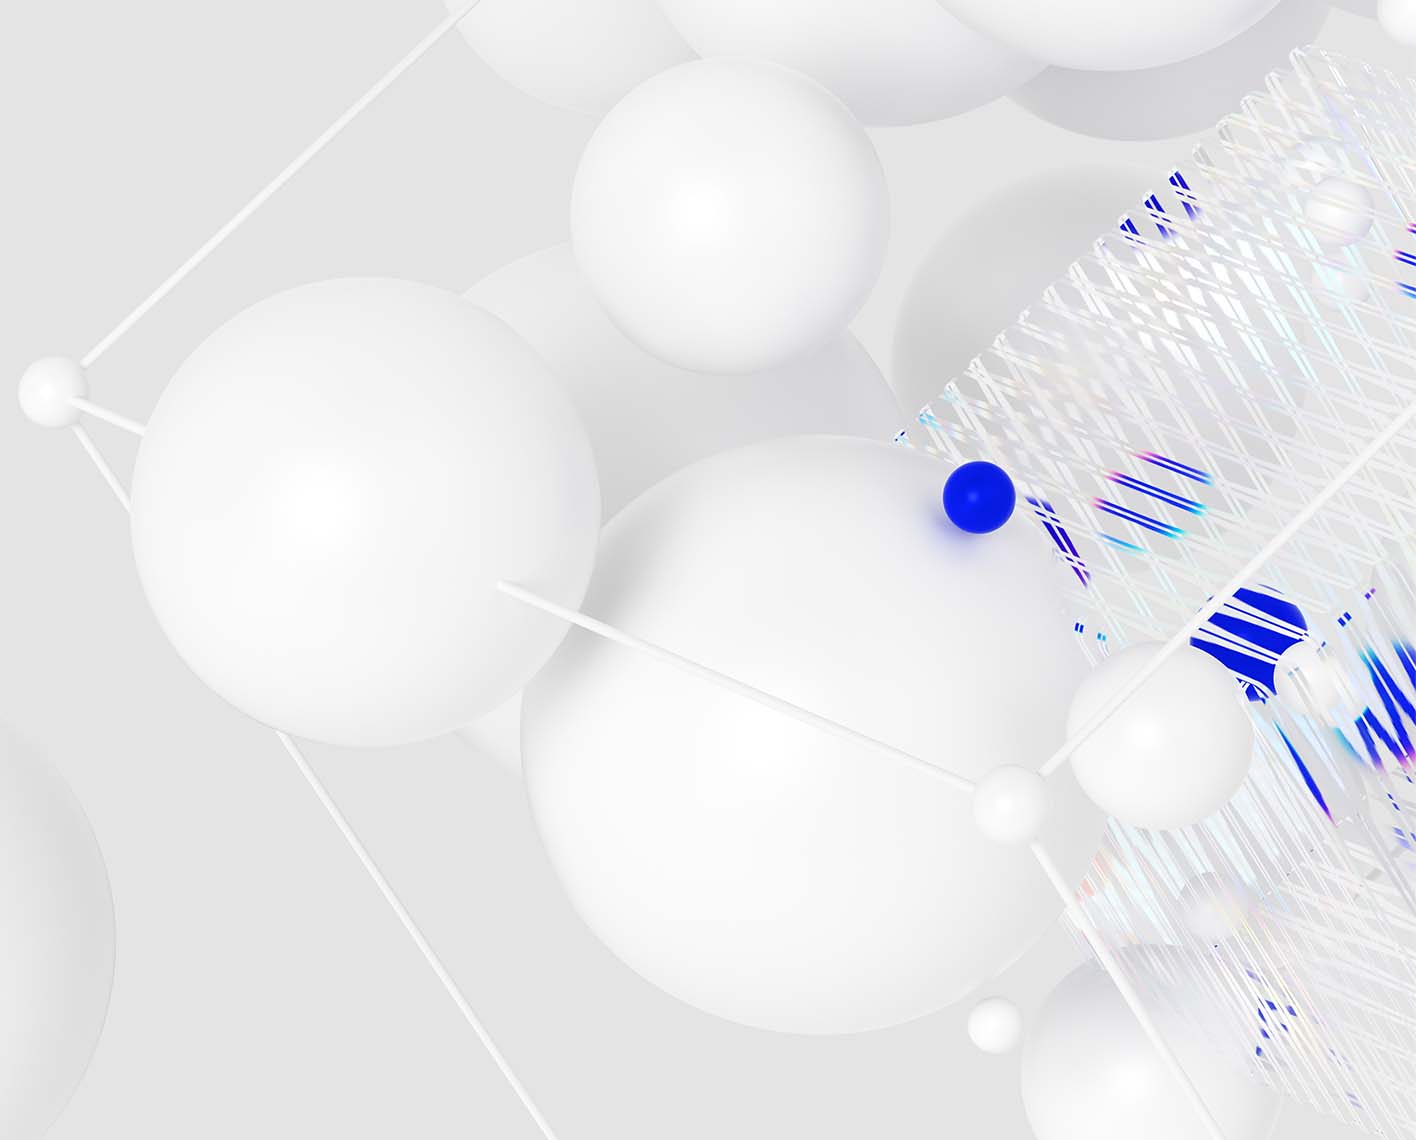 3D CGI image of white and blue spheres on a white background (SLB_Carbon_Capture_04)